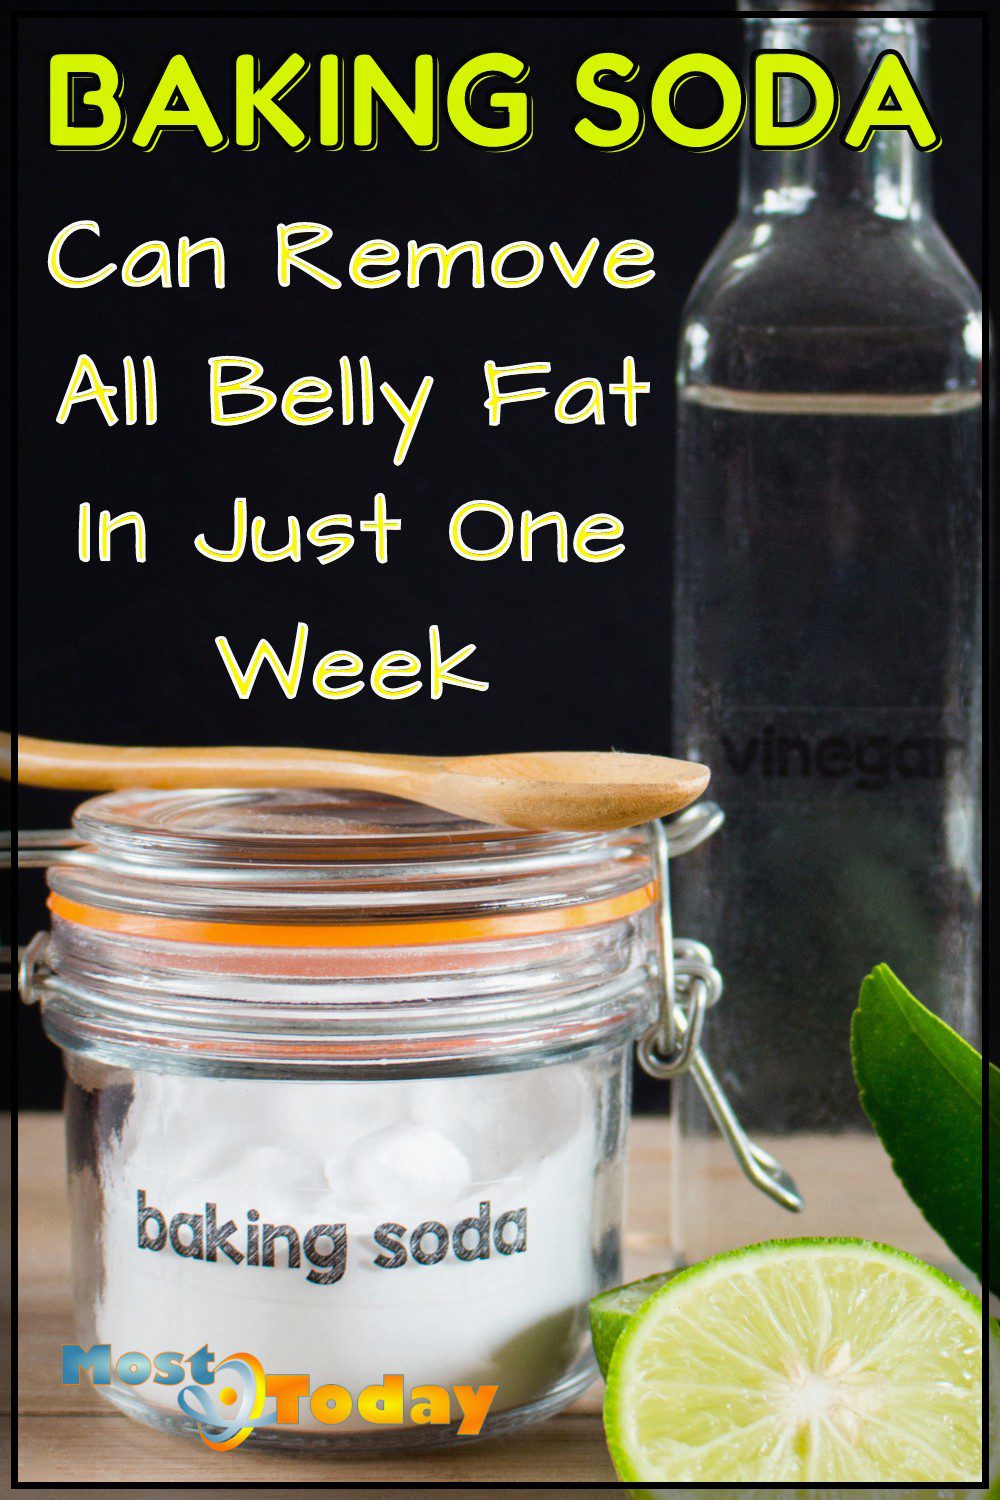 Baking Soda Startling Fact About How To Remove All Belly Fat